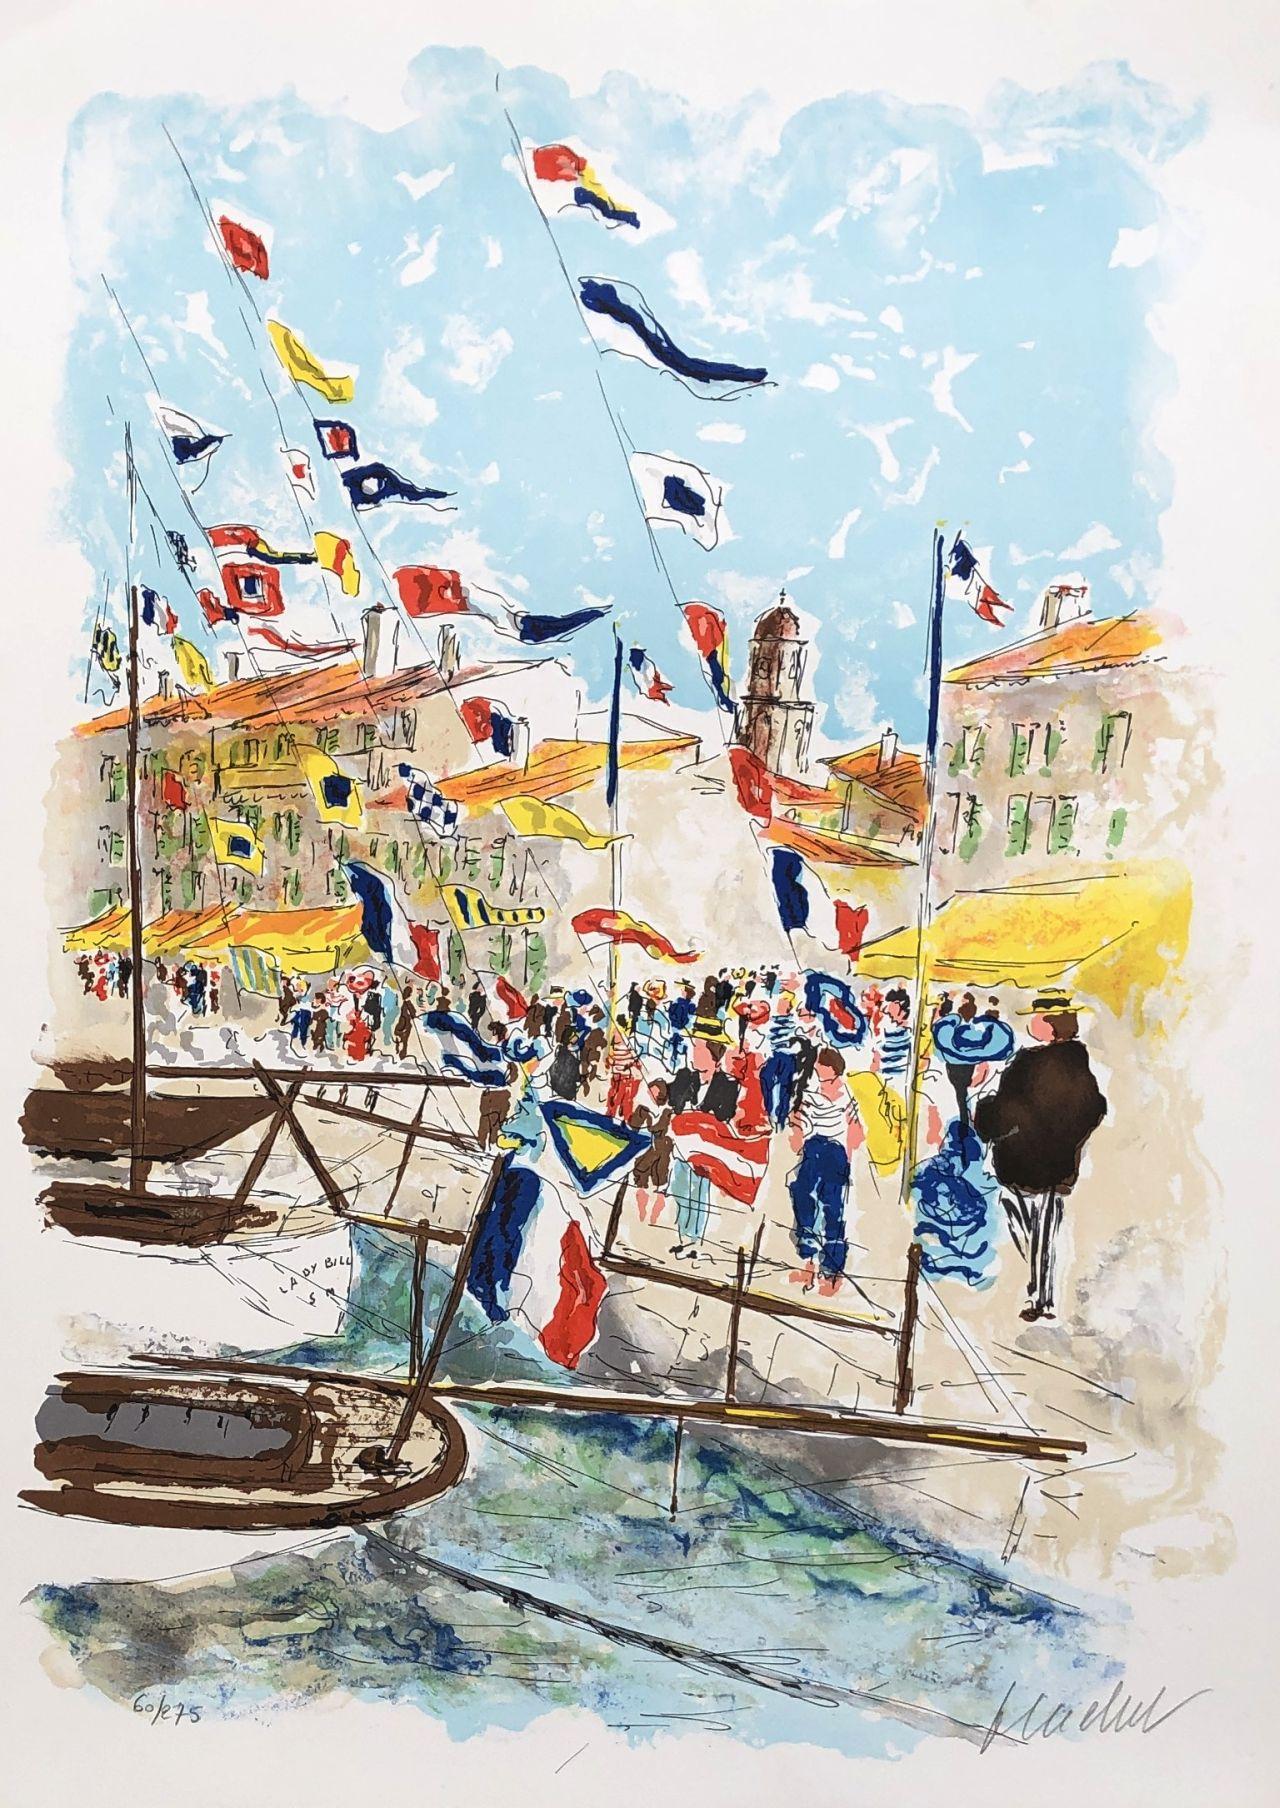 Urbain Huchet Landscape Print - Saint Tropez French Riviera - Original Lithograph Handisgned and numbered